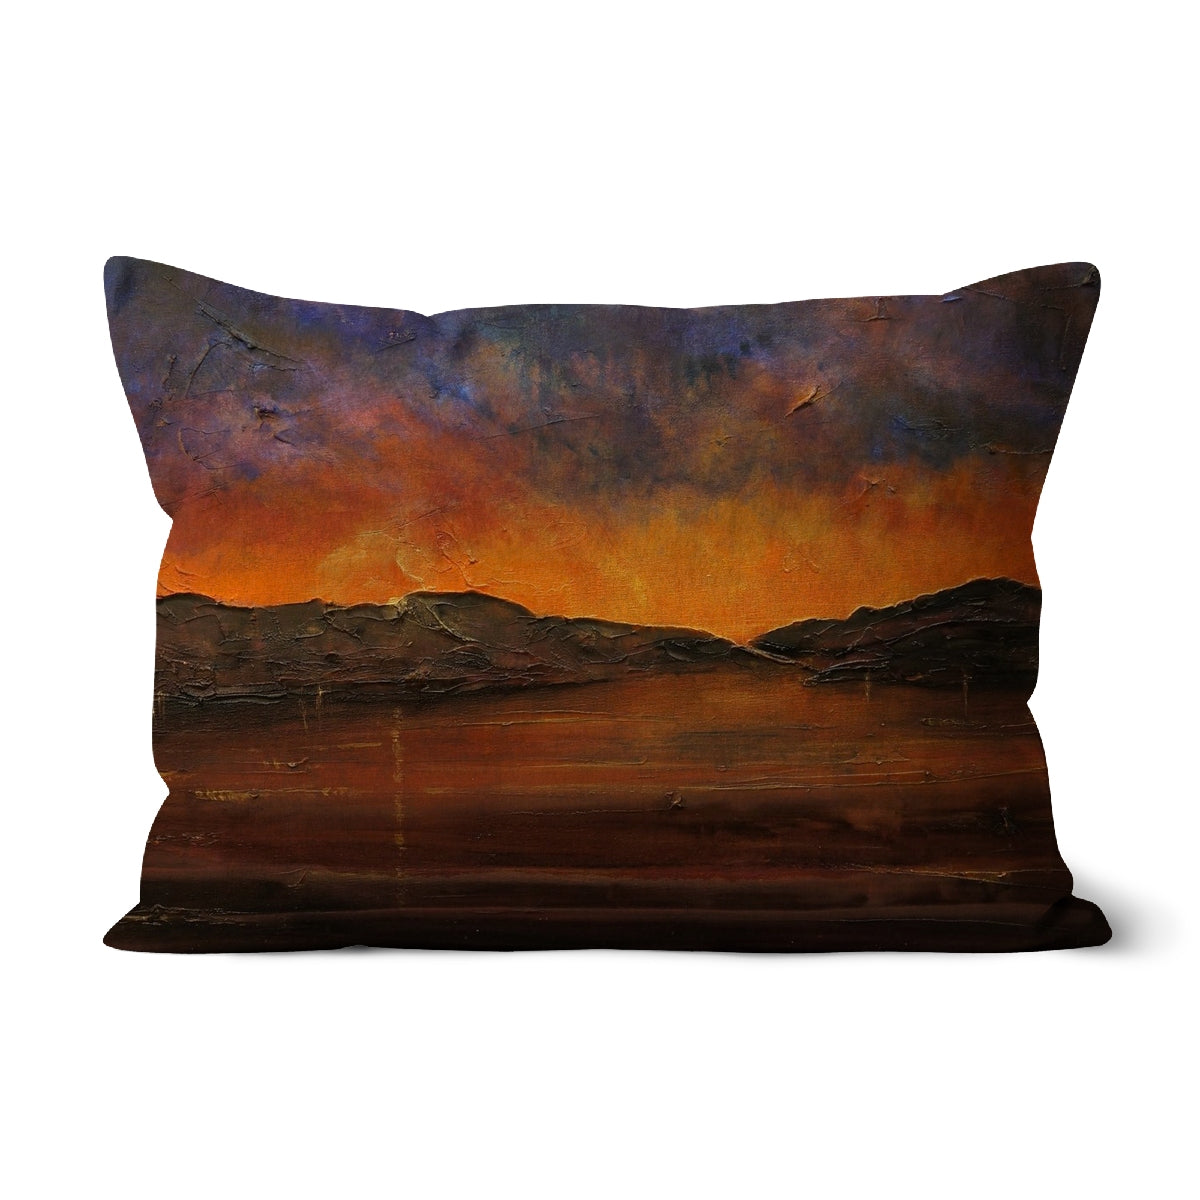 A Brooding Clyde Dusk Art Gifts Cushion-Cushions-River Clyde Art Gallery-Canvas-19"x13"-Paintings, Prints, Homeware, Art Gifts From Scotland By Scottish Artist Kevin Hunter